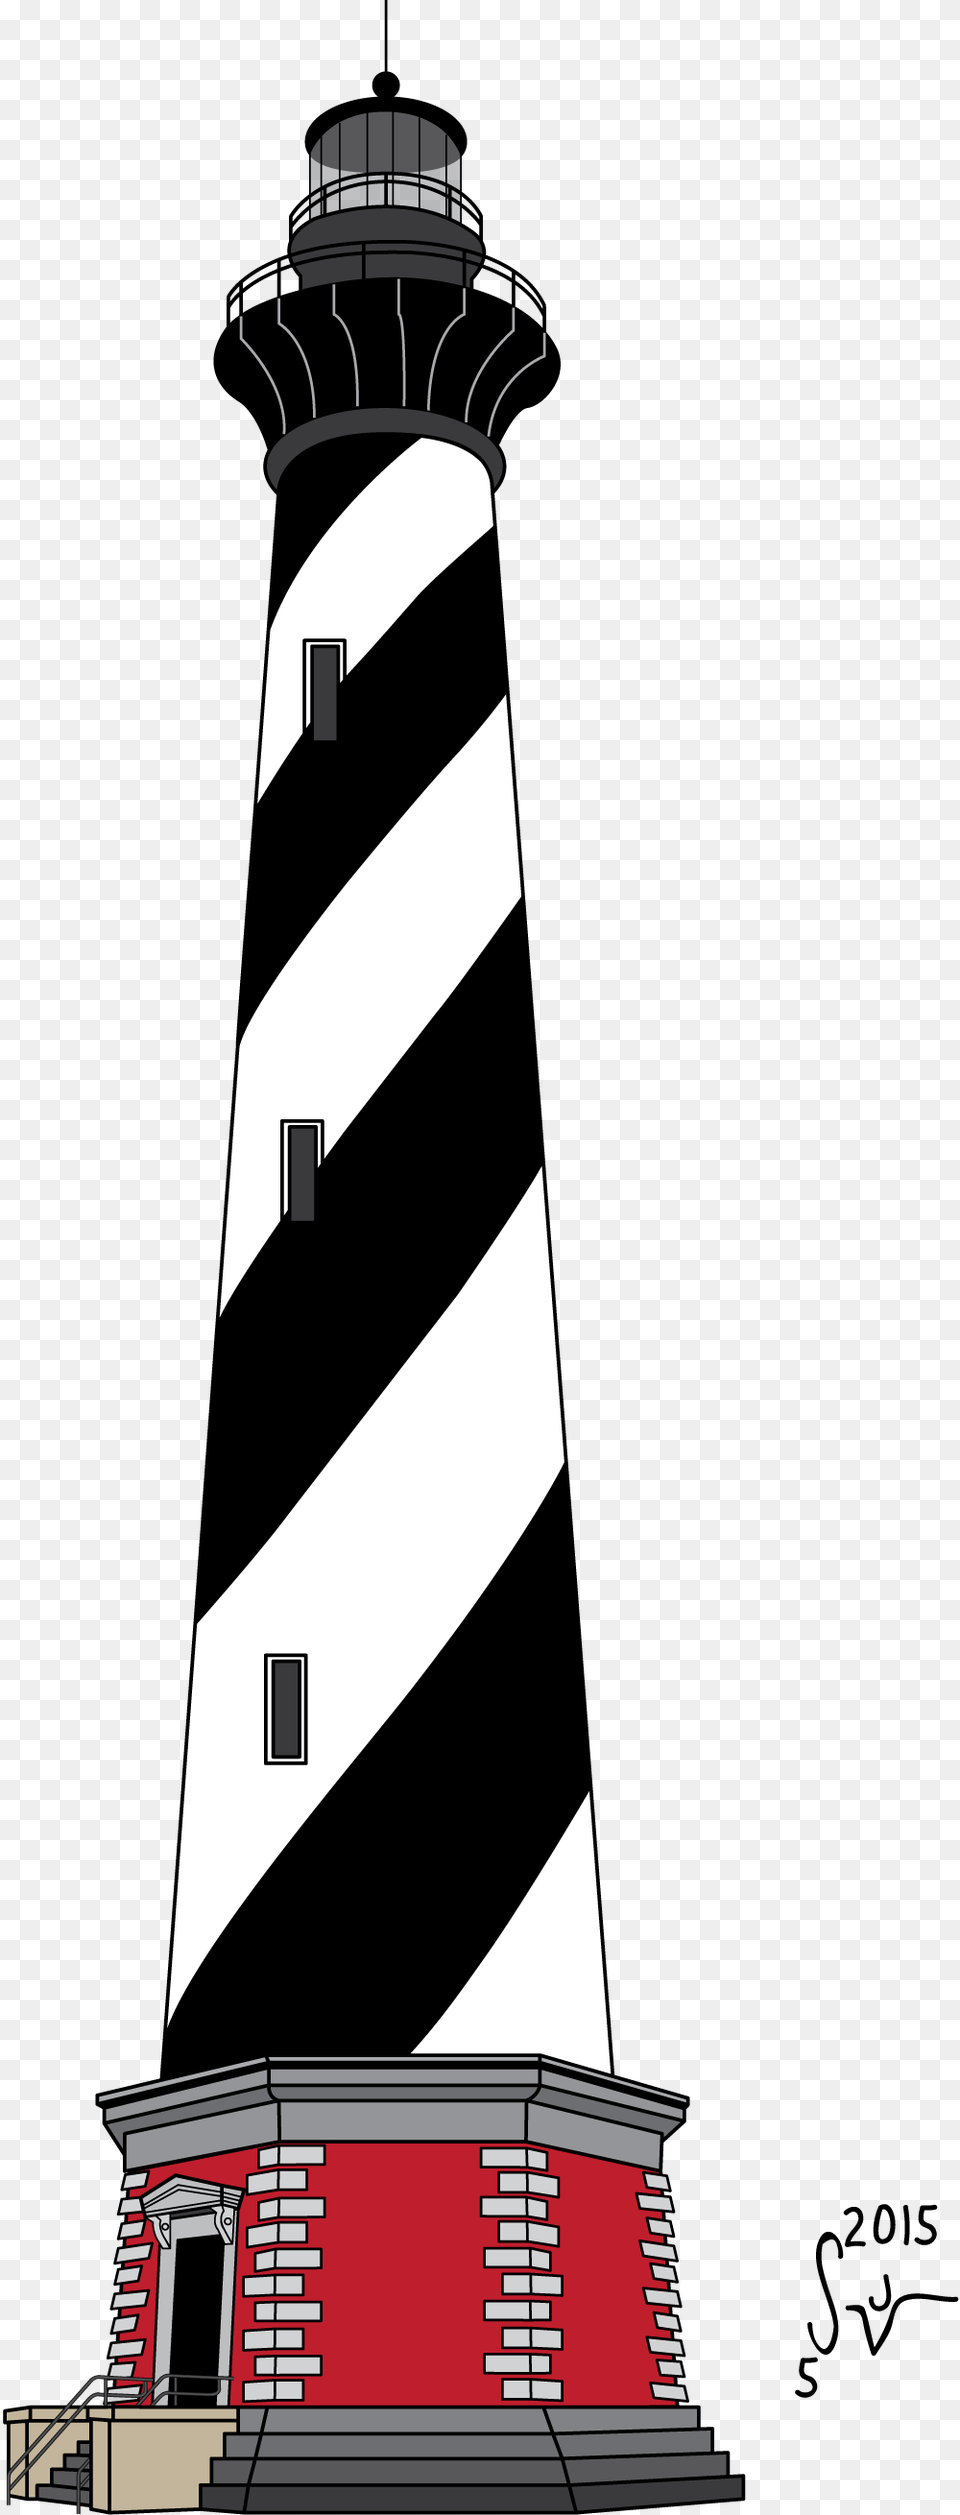 Lighthouse, Architecture, Building, Tower, Beacon Free Png